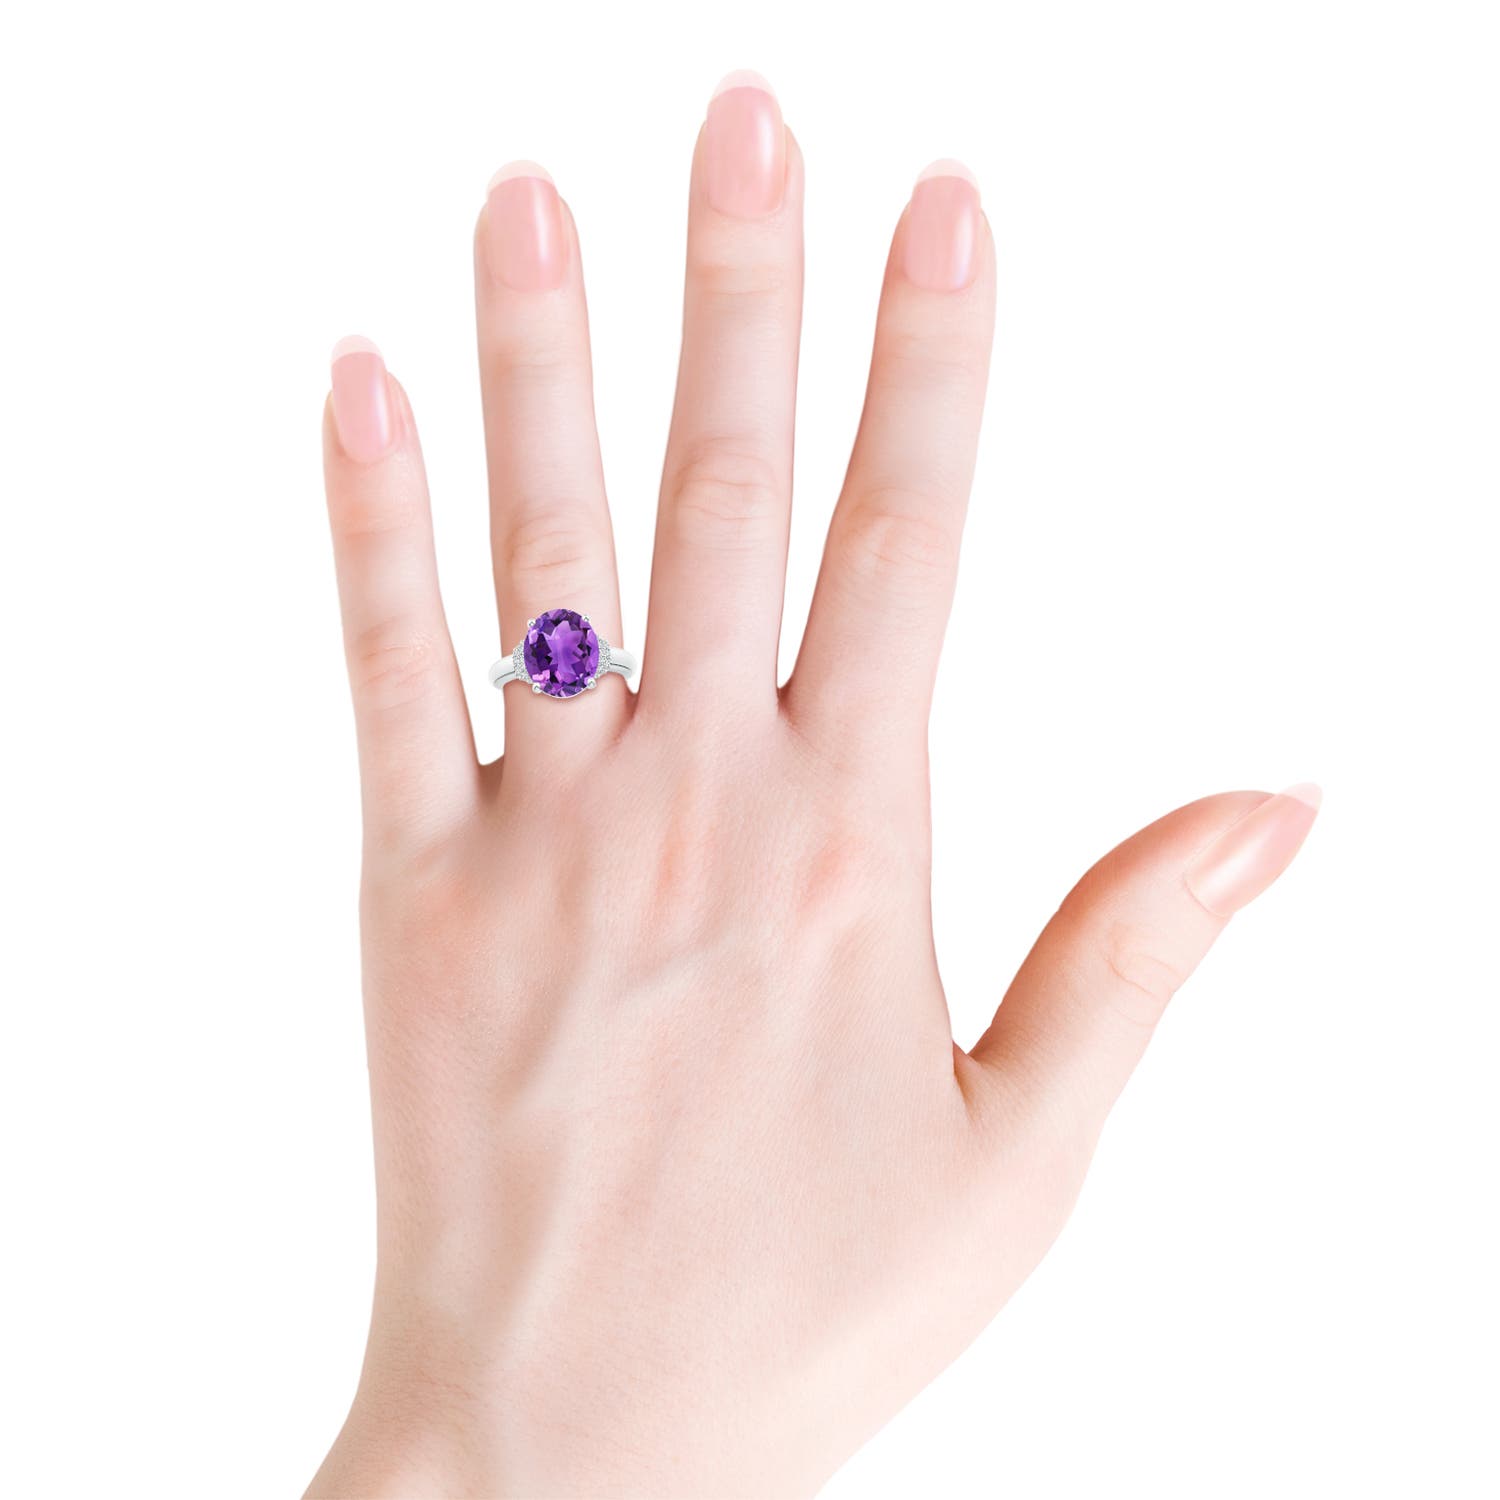 AAA - Amethyst / 4.54 CT / 14 KT White Gold